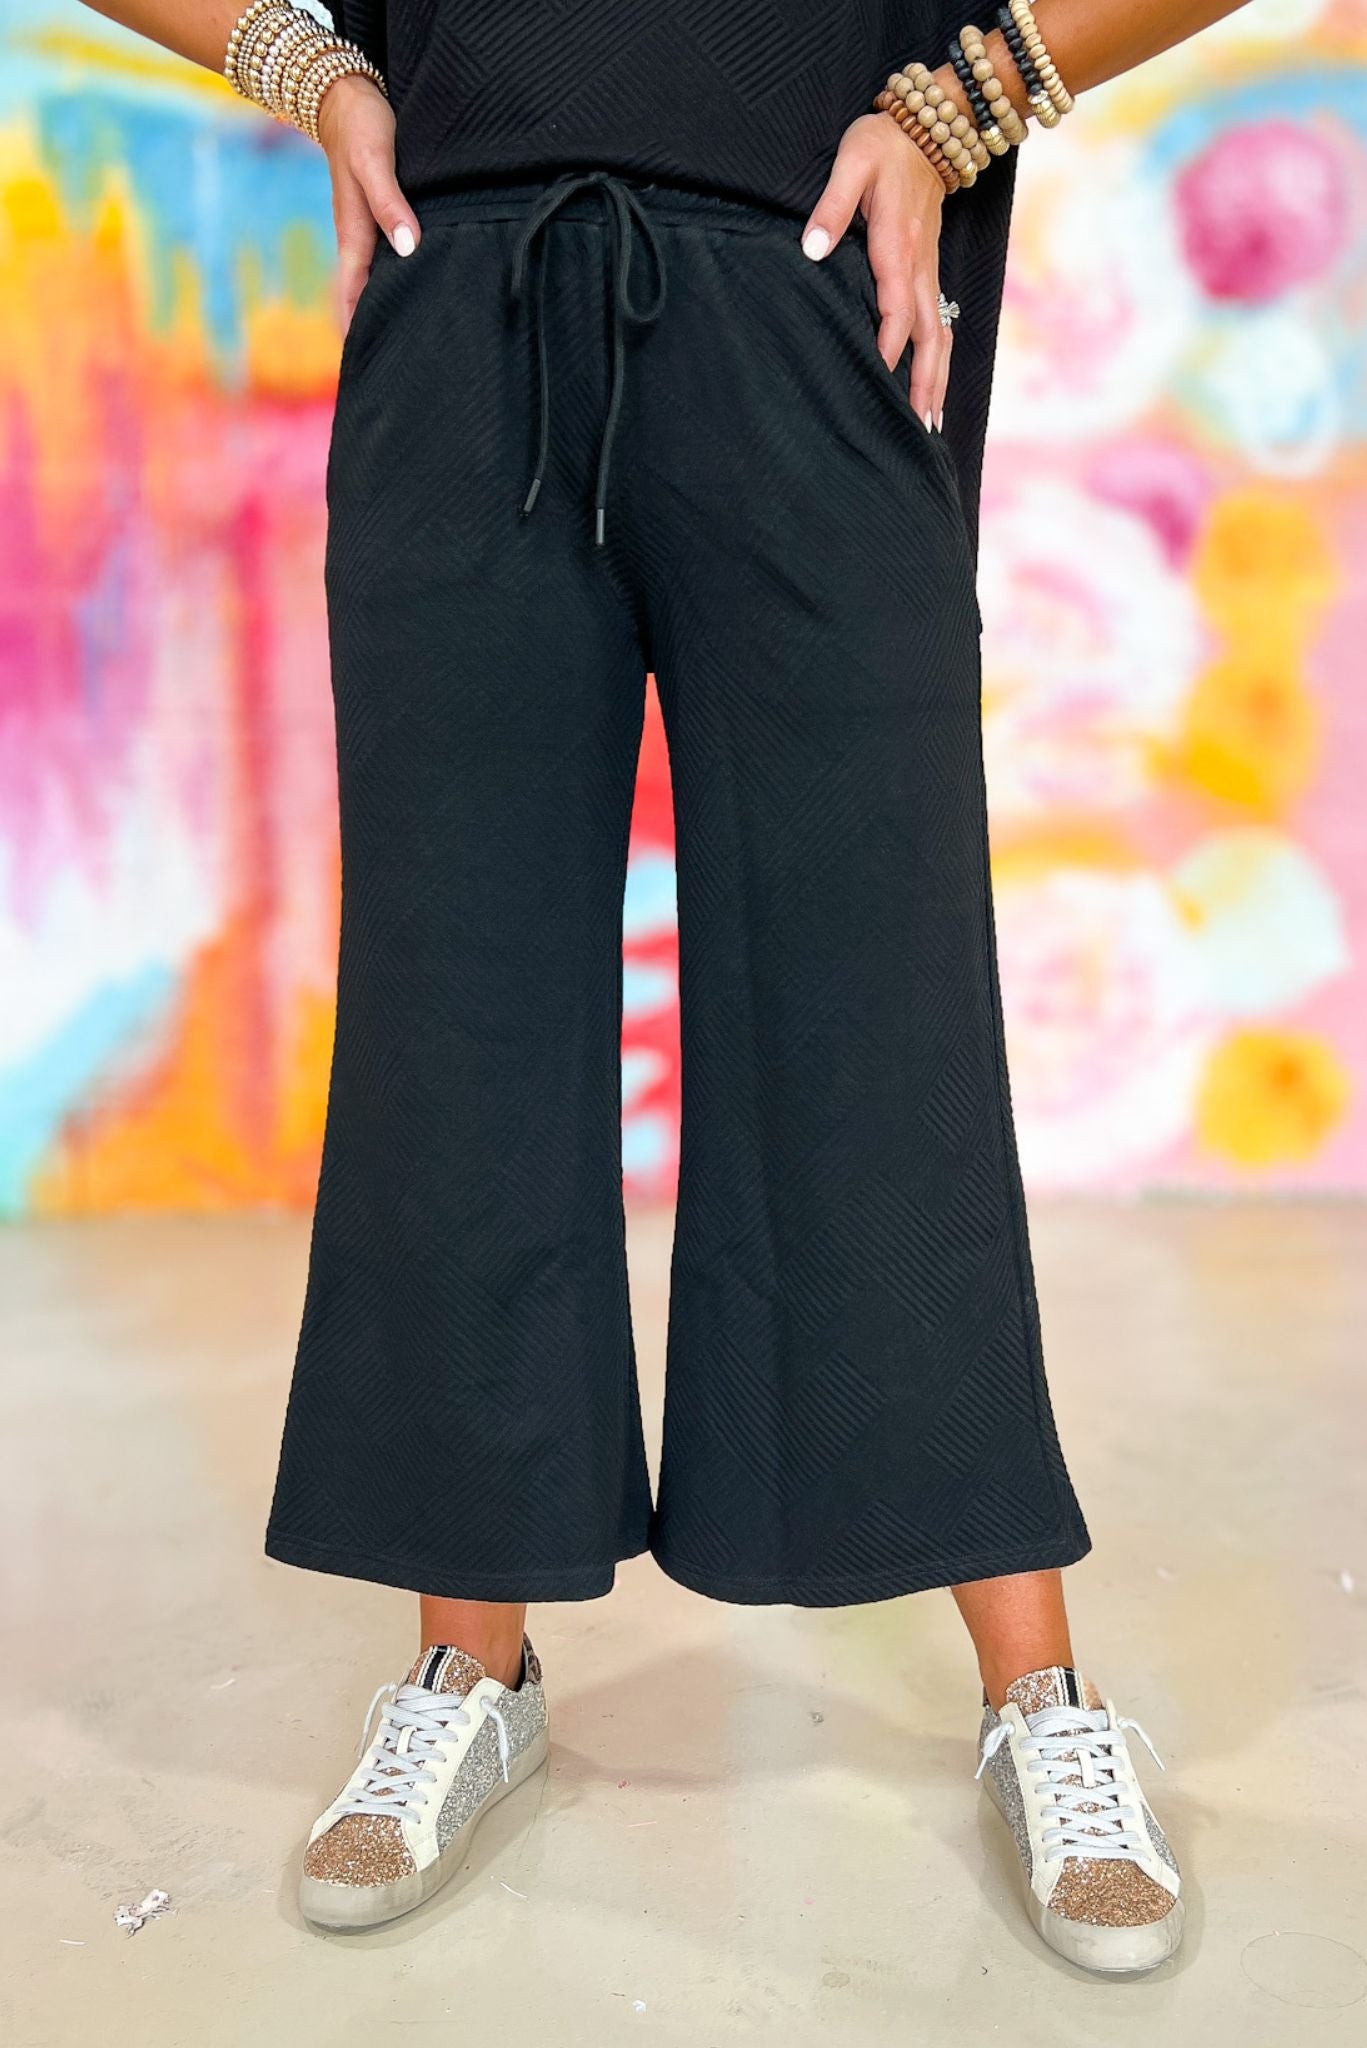 Load image into Gallery viewer, Black Textured Drop Shoulder Wide Leg Pants Set, fall transition piece, chic updated pant, versatile top, mom style, running errands, easy to style, matching set, shop style your senses by mallory fitzsimmons
